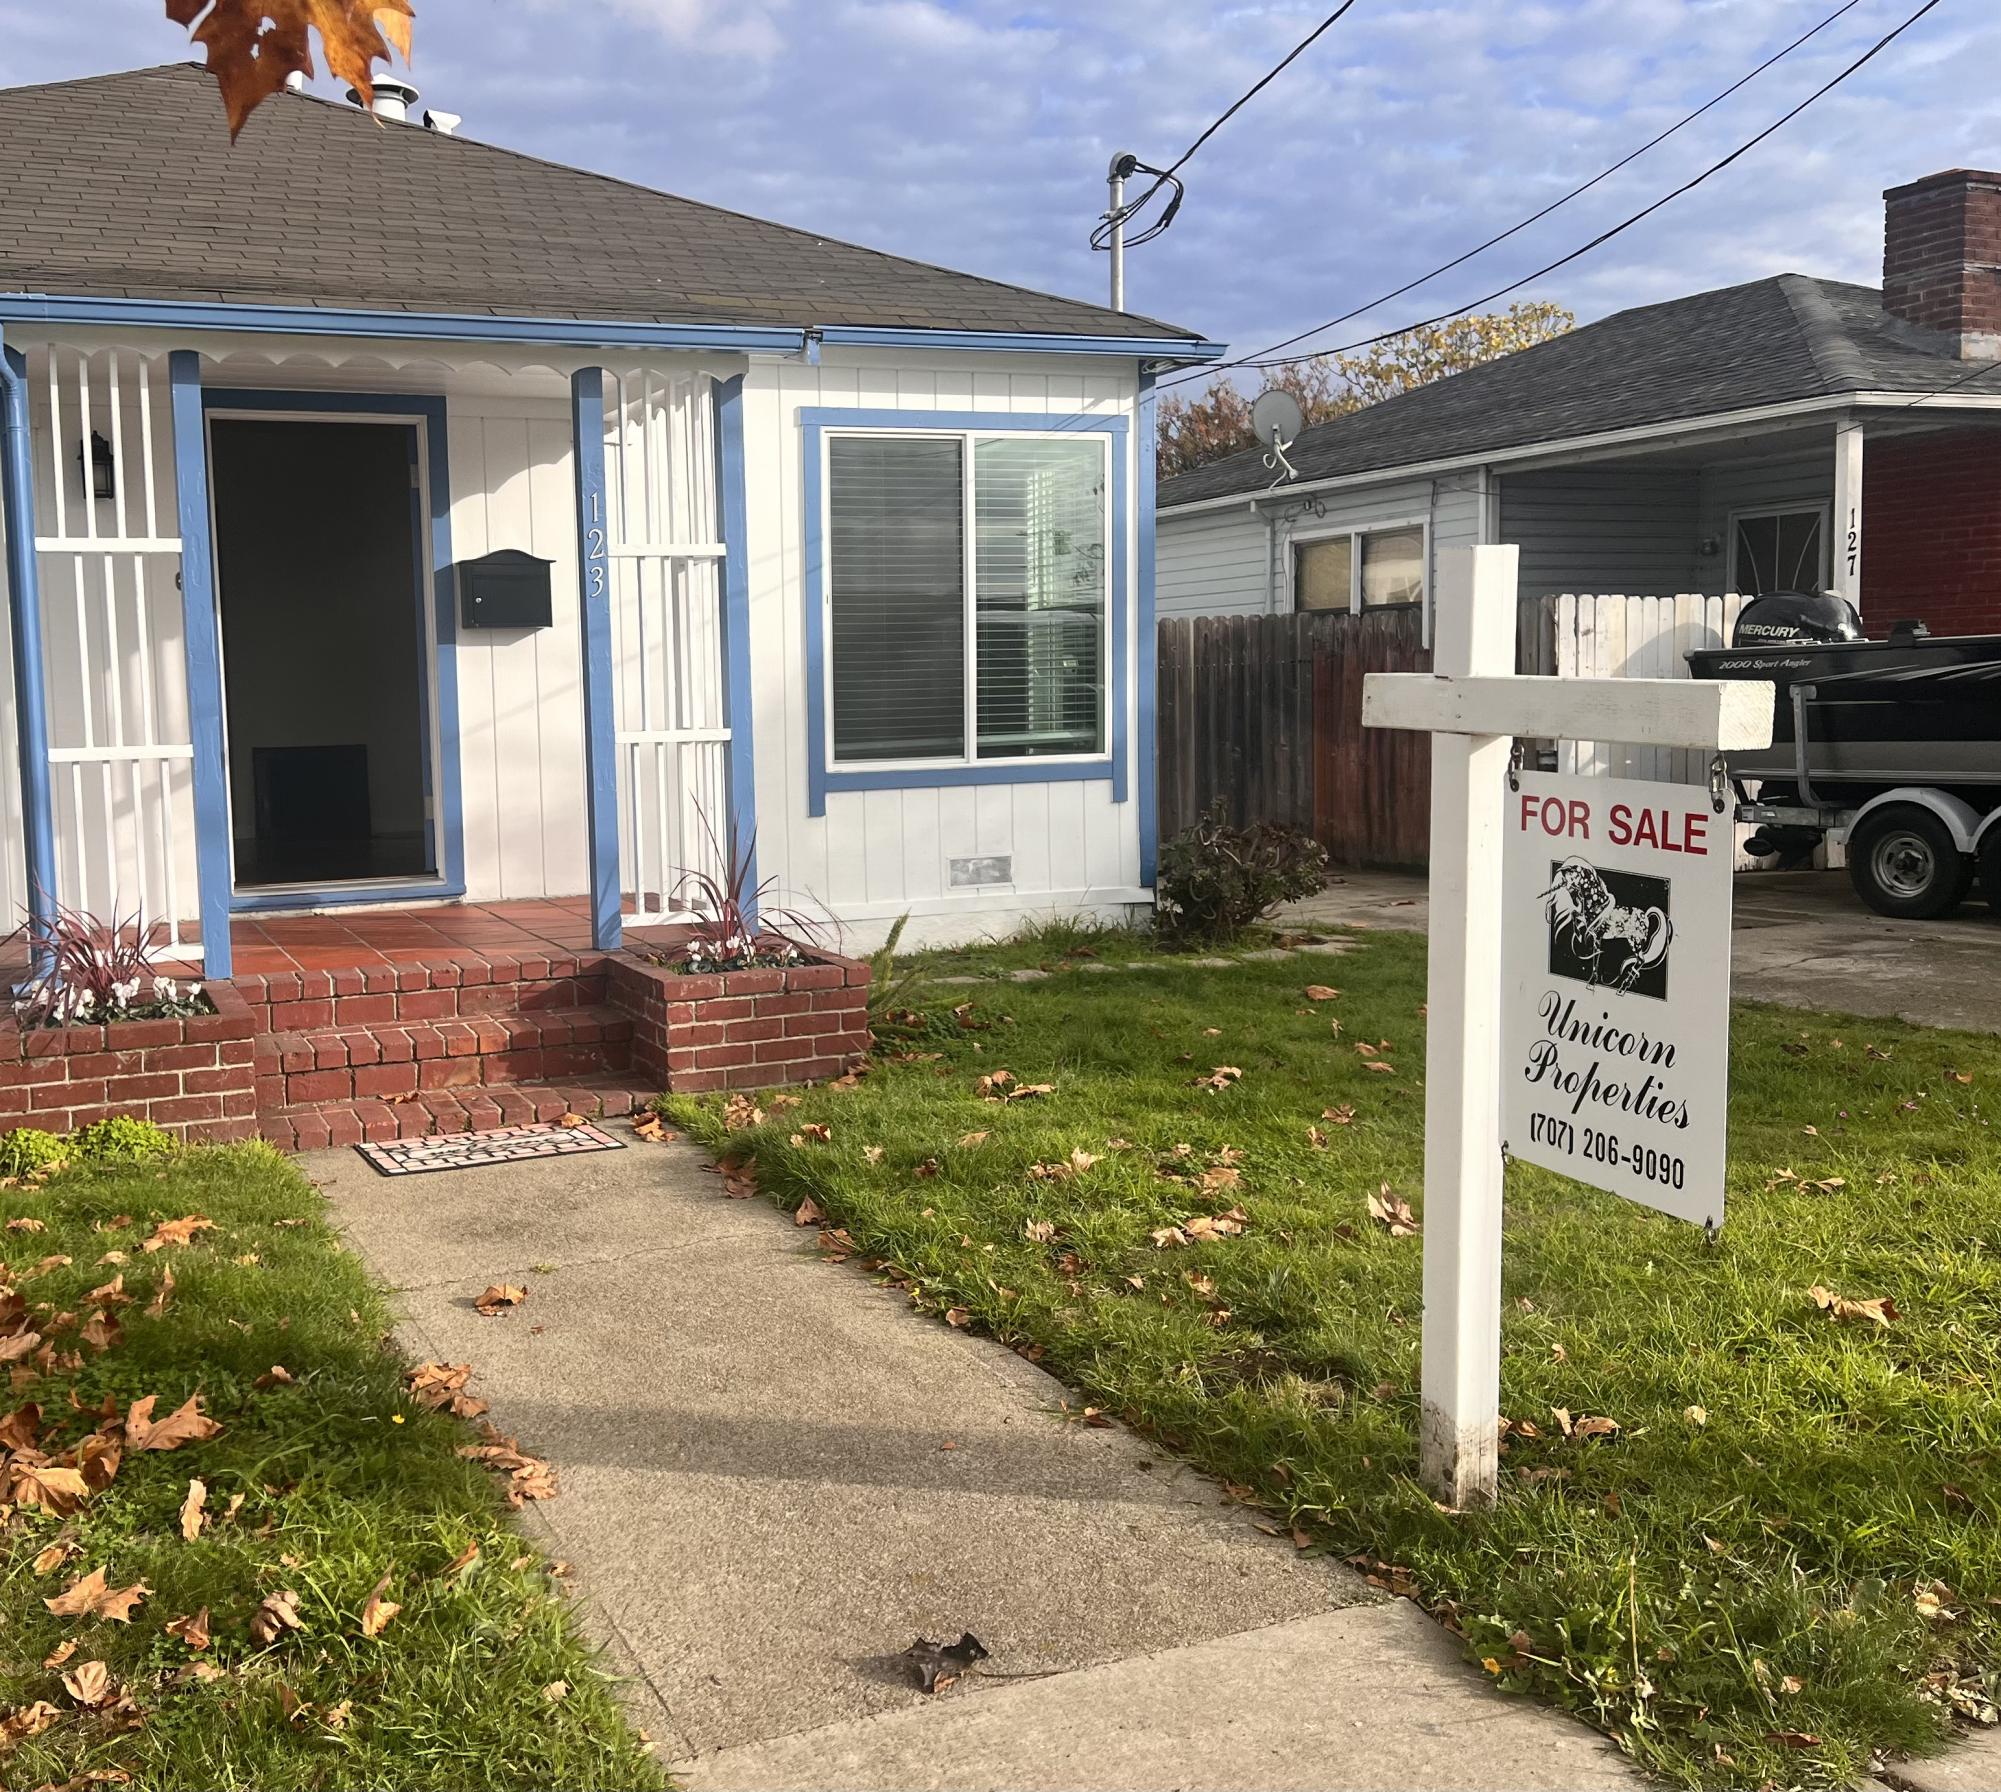 Inflation amidst home prices is a massive burden upon citizens looking to settle in the beloved Bay Area. Currently listed at $1 million, the bold price of this Alameda property reflects the difficulty of home hunting.